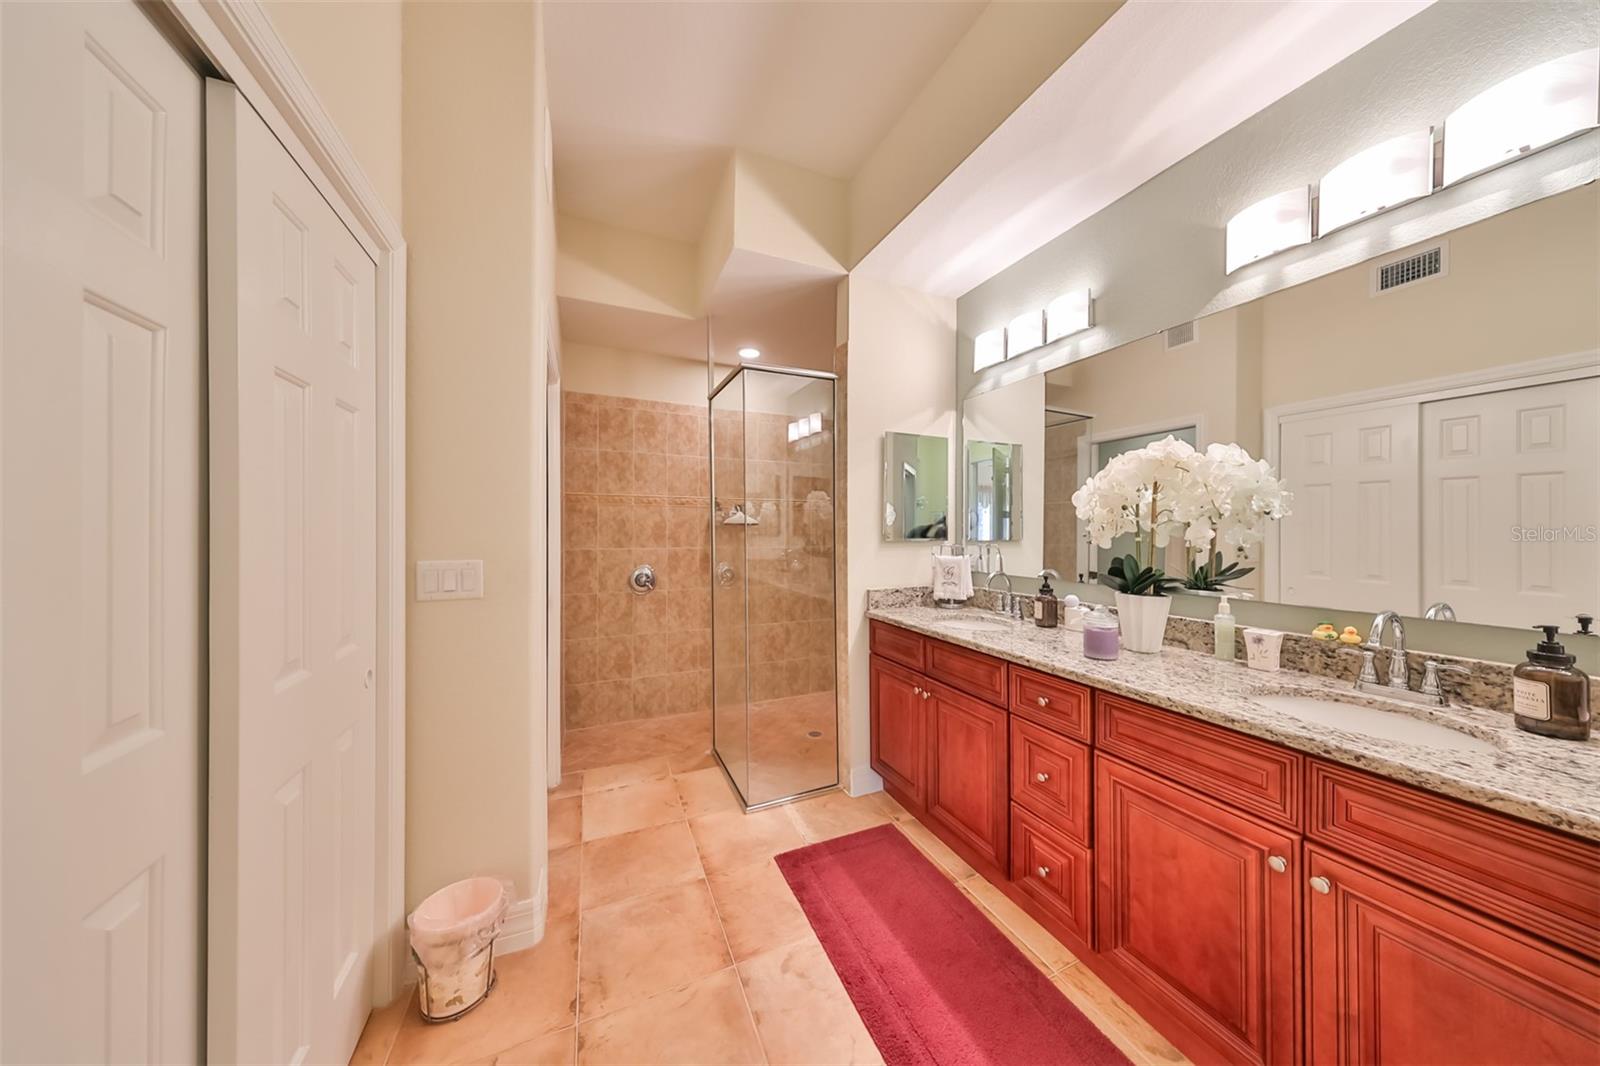 The ensuite bathroom boasts of granite counters, dual sinks, a modern glass shower, a secondary closet, a linen closet and a private water closet.